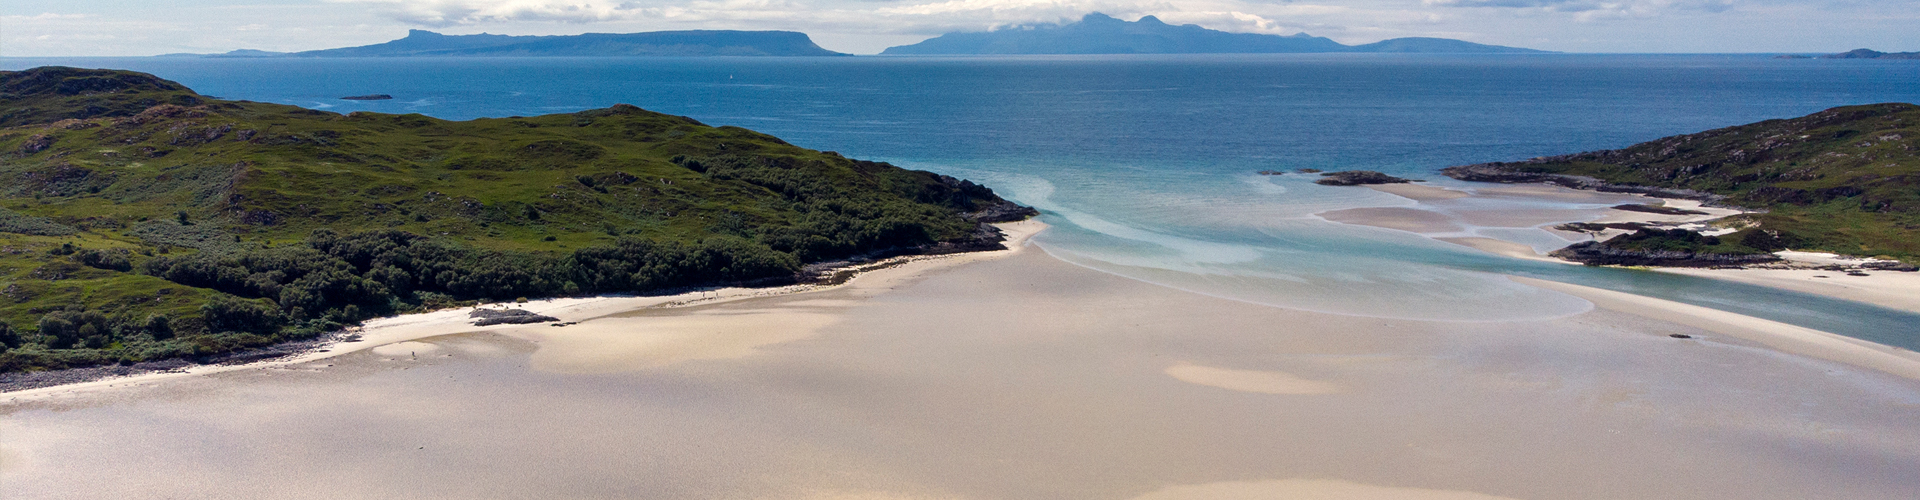 Morar Bay from the air with Eigg and Rum in the distance